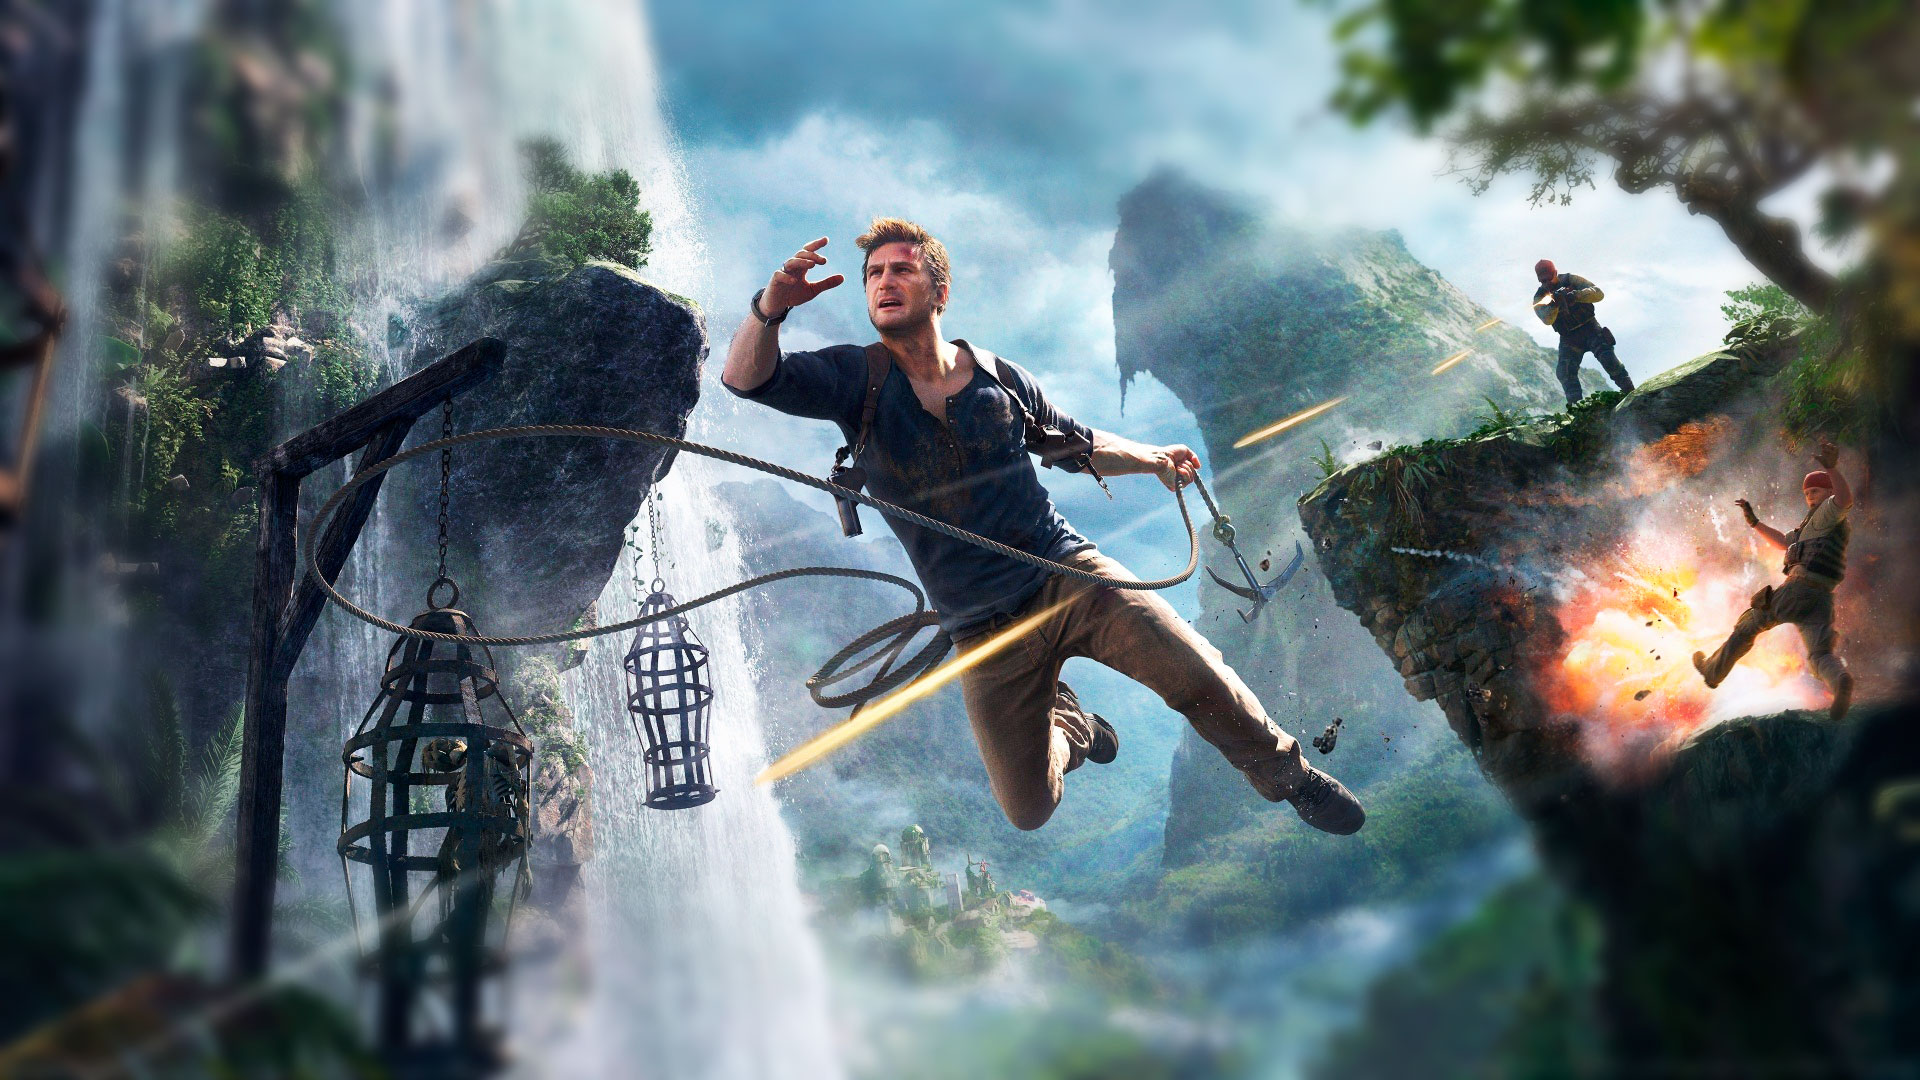 PS4 Uncharted 4: A Thief’s End